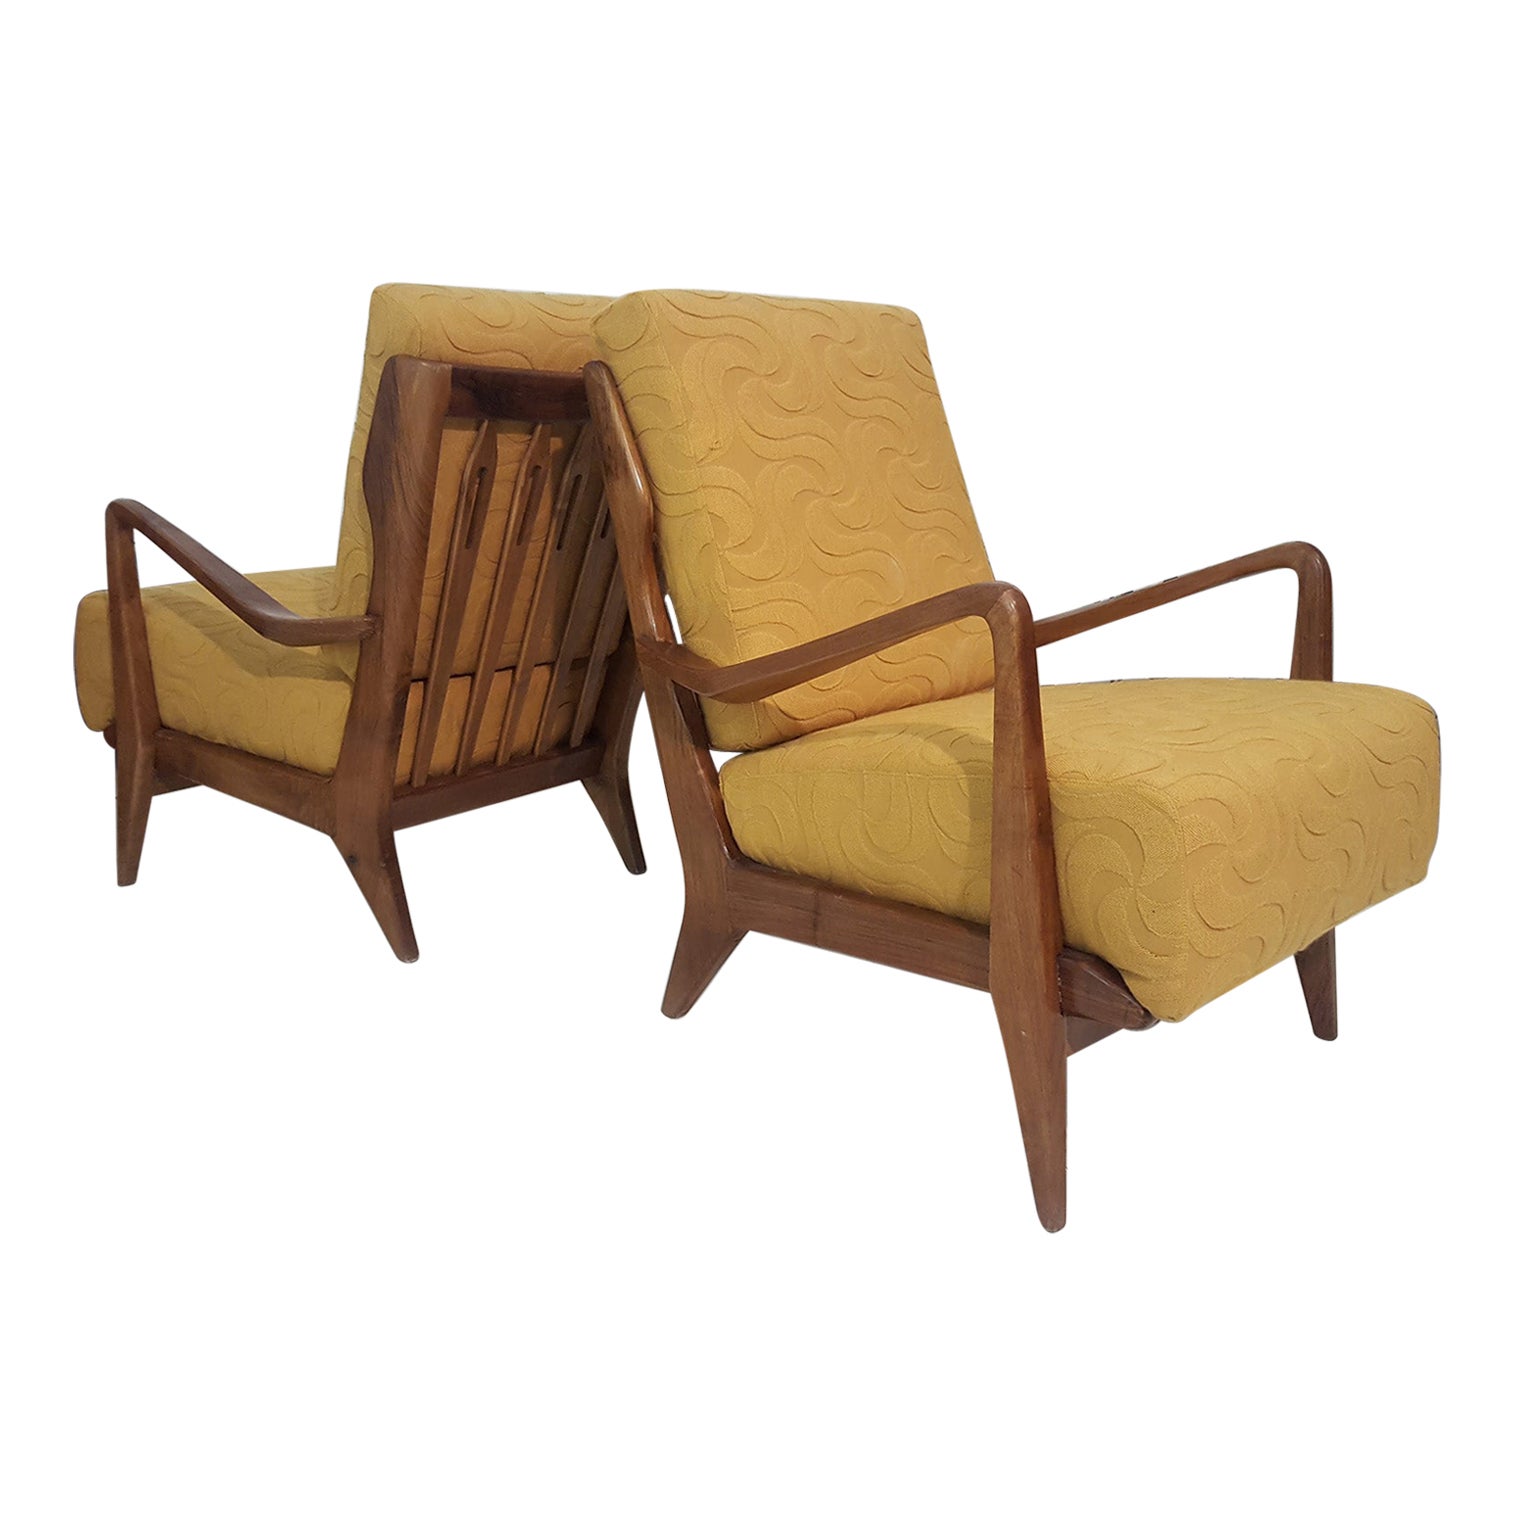 Gio Ponti for Cassina Couple of Armchairs Mod. 516, Milano, 1955